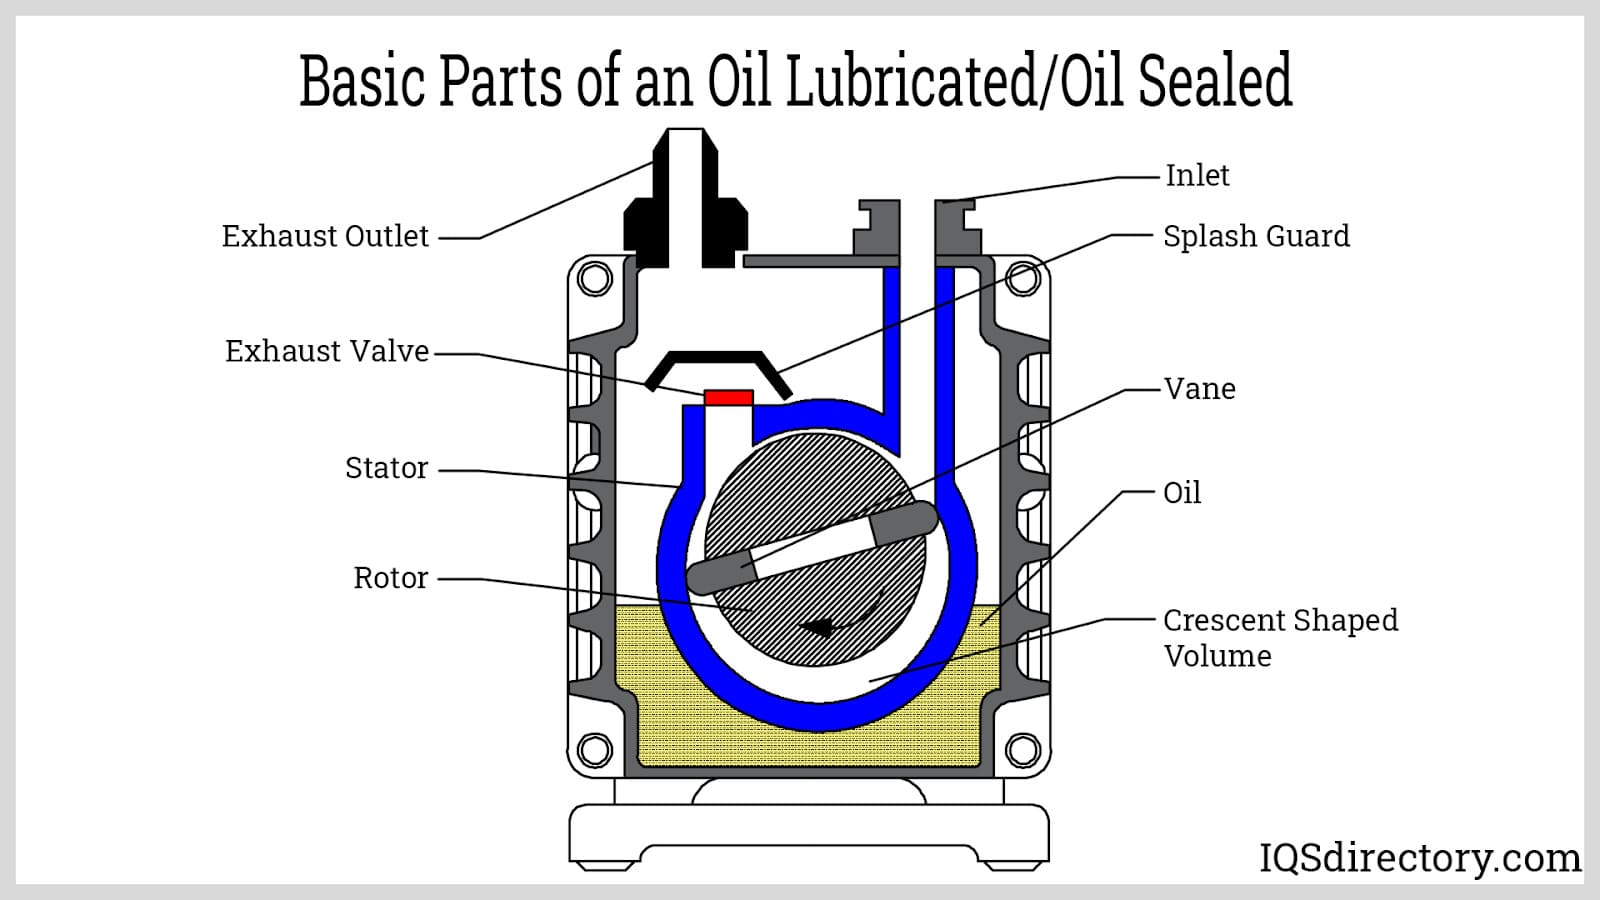 Basic Parts of an Oil Lubricated/Oil Sealed